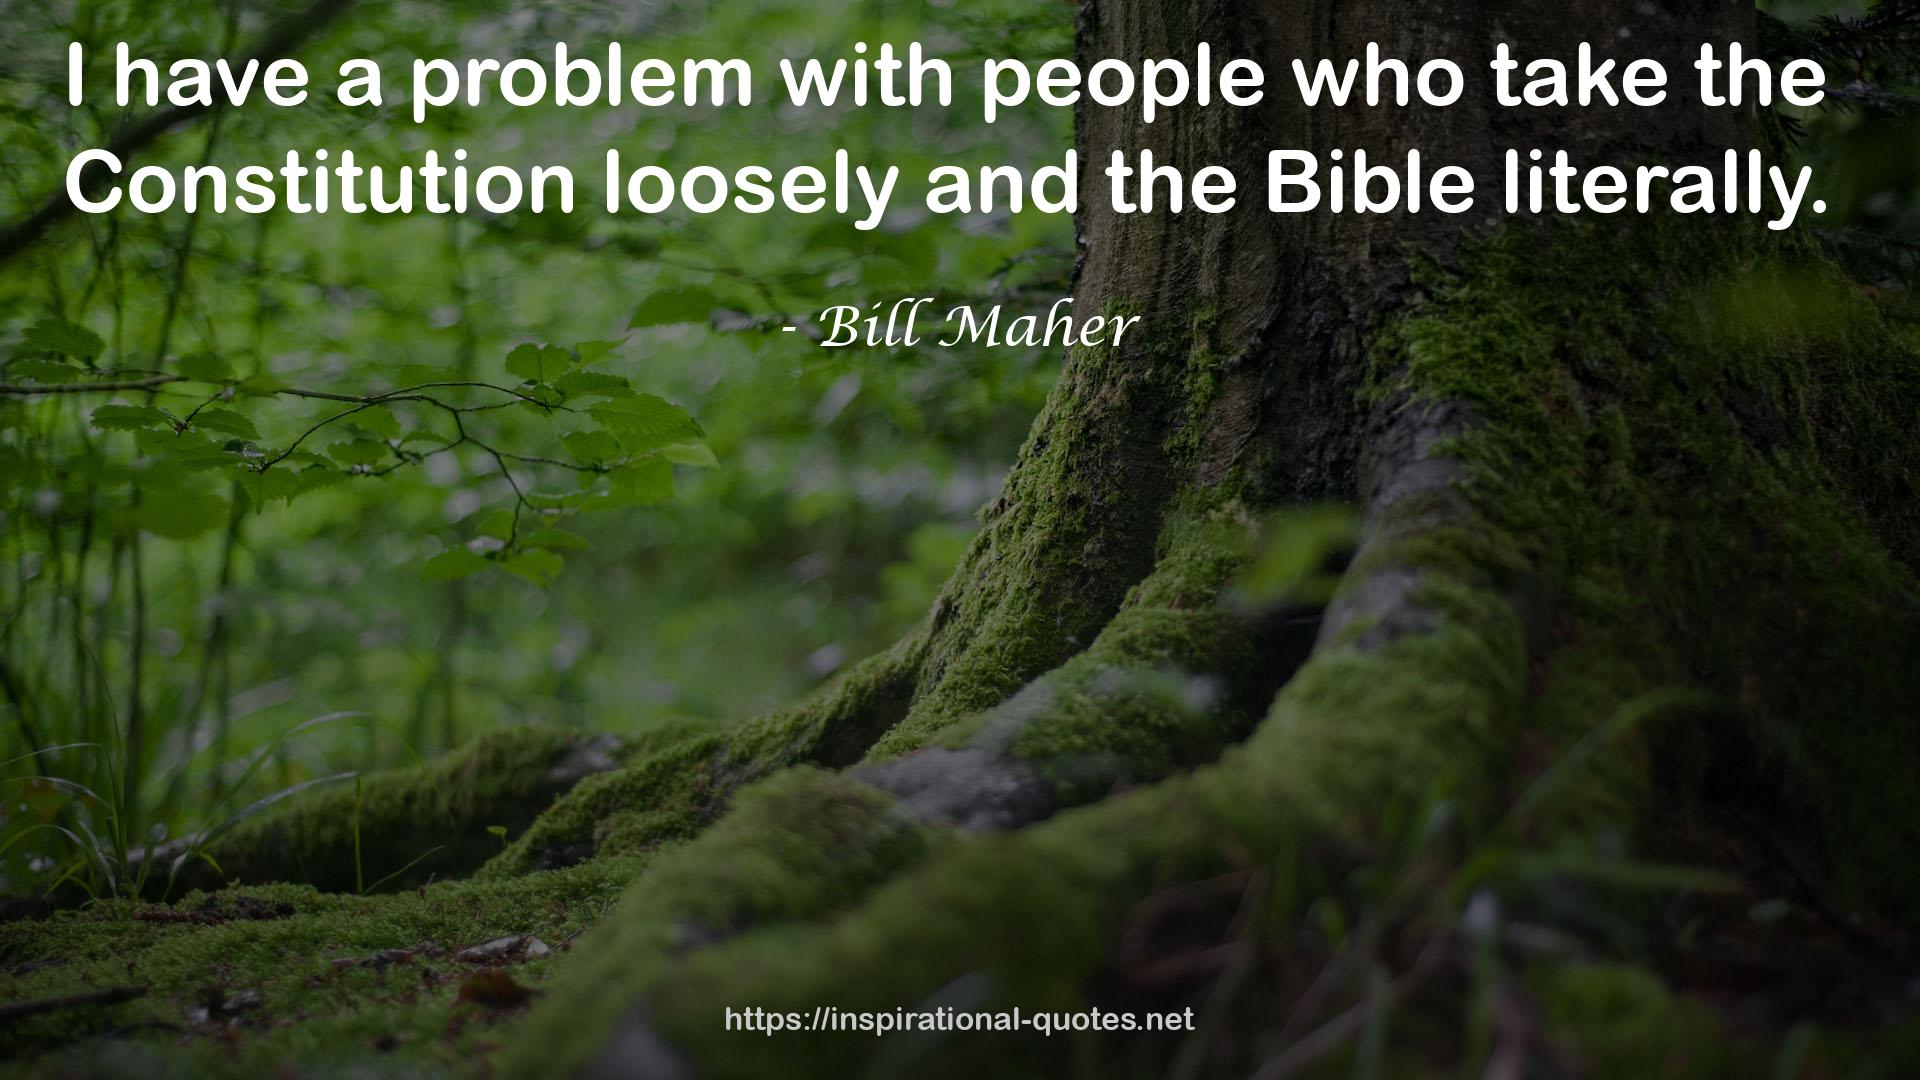 Bill Maher QUOTES